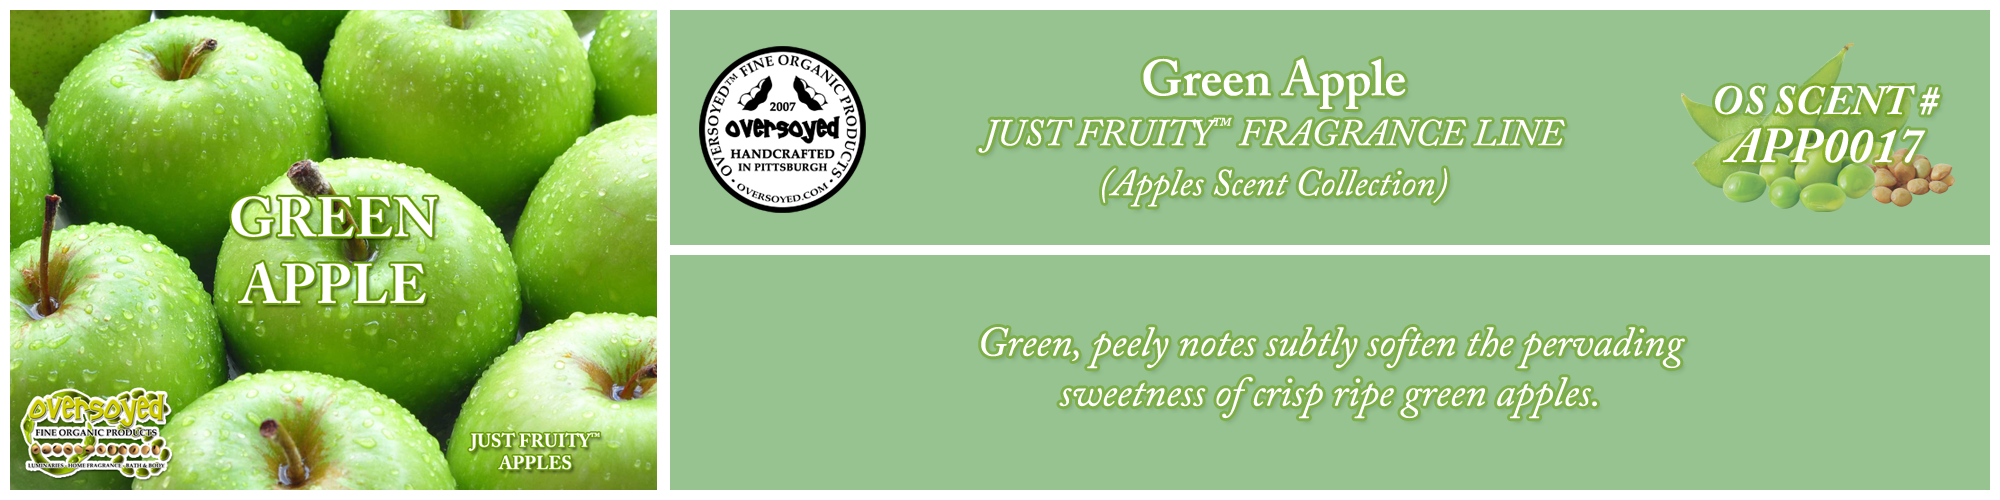 Green Apple Handcrafted Products Collection